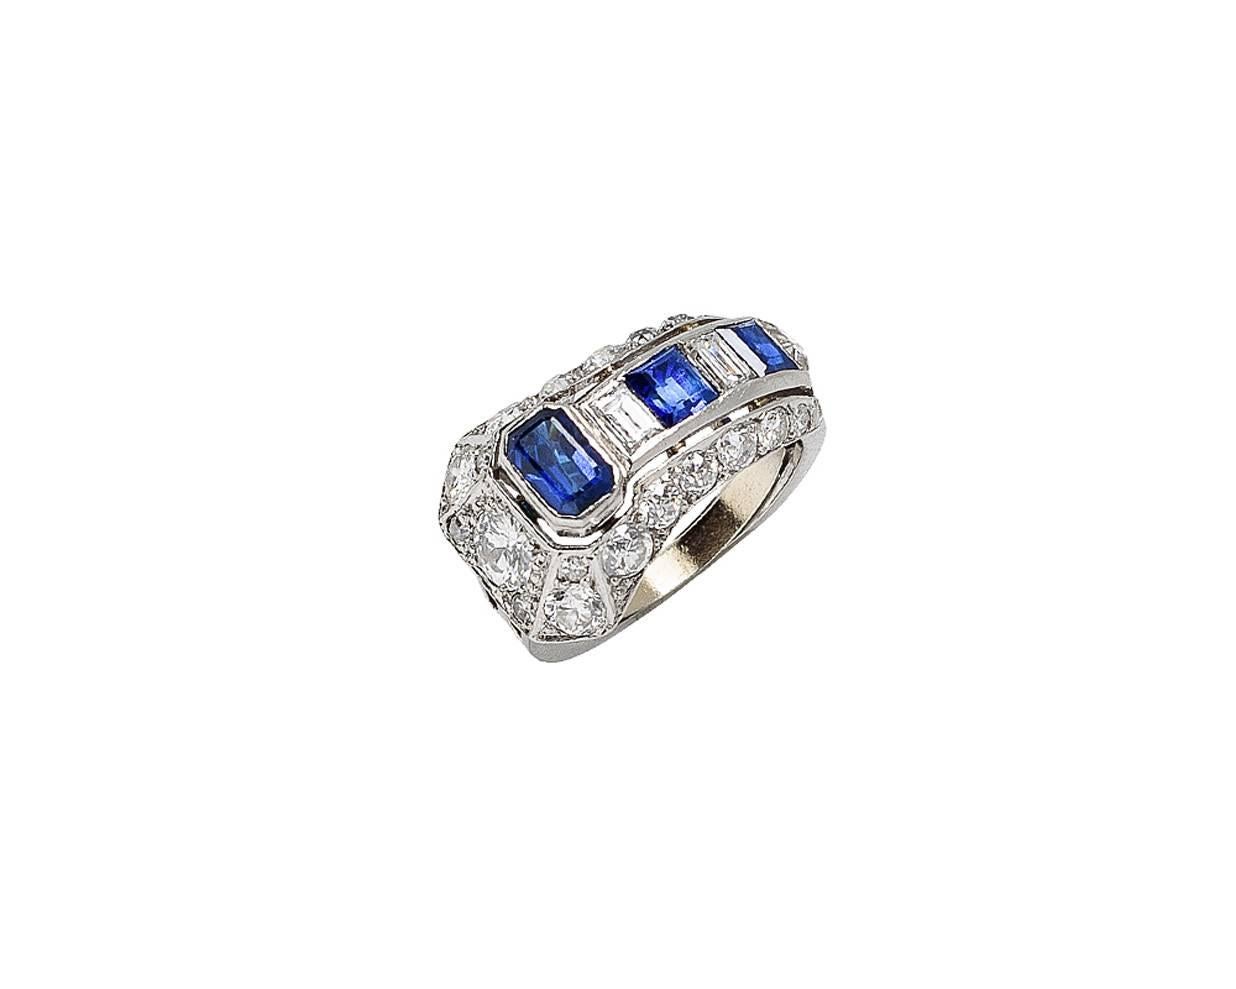 Unique Art Deco diamond and sapphire ring, the center in the shape of an arrow with a triangular-shaped diamond at the point and a bezel-set sapphire in the rear. The shank is intricately pierced and currently contains a platinum ring guard for